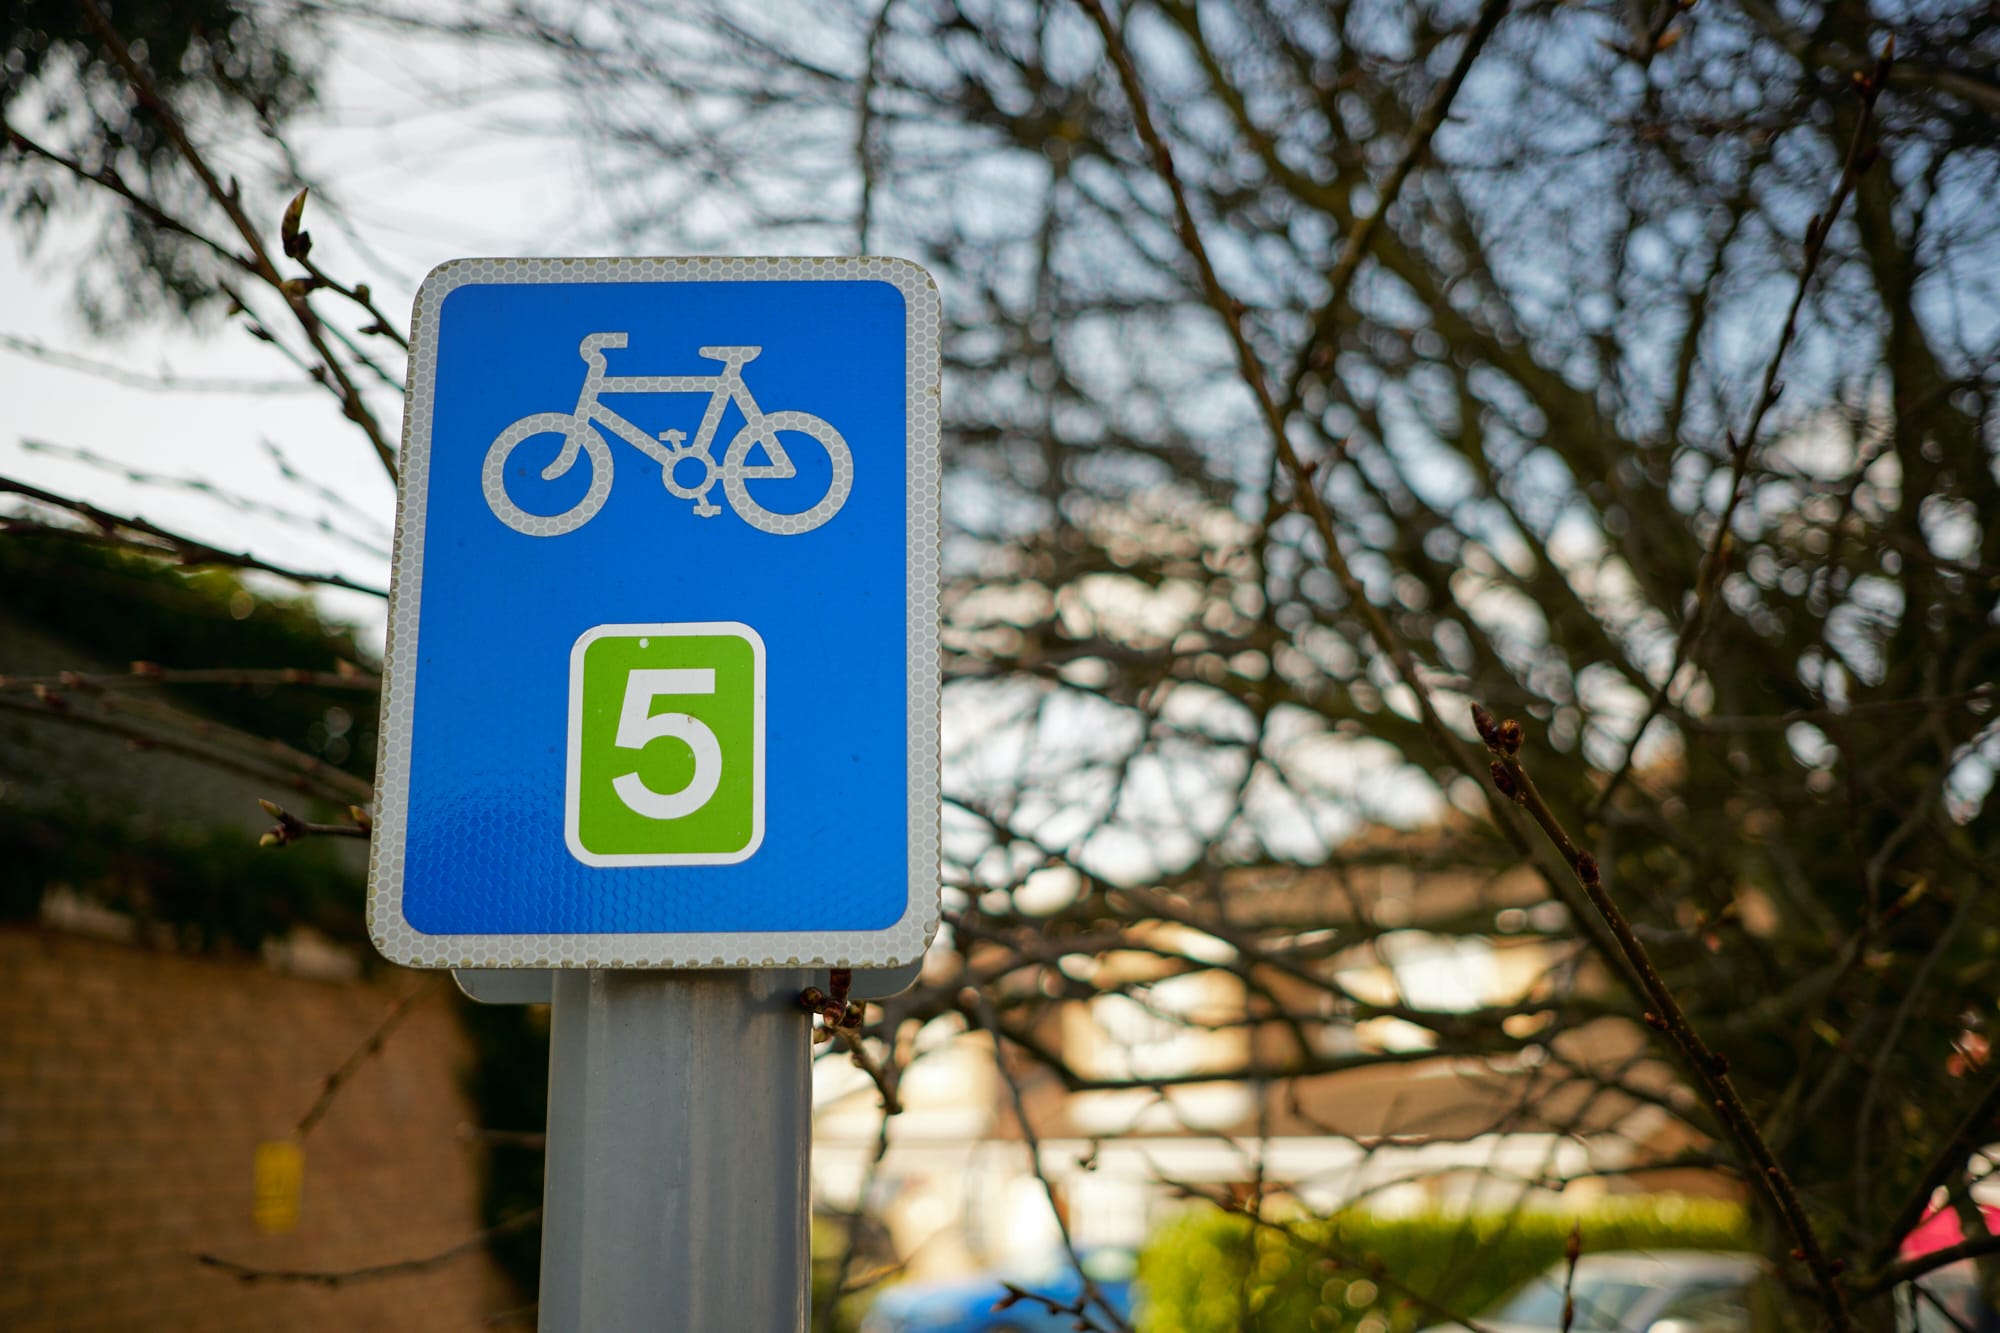 cycle path sign against out of focus tree branches